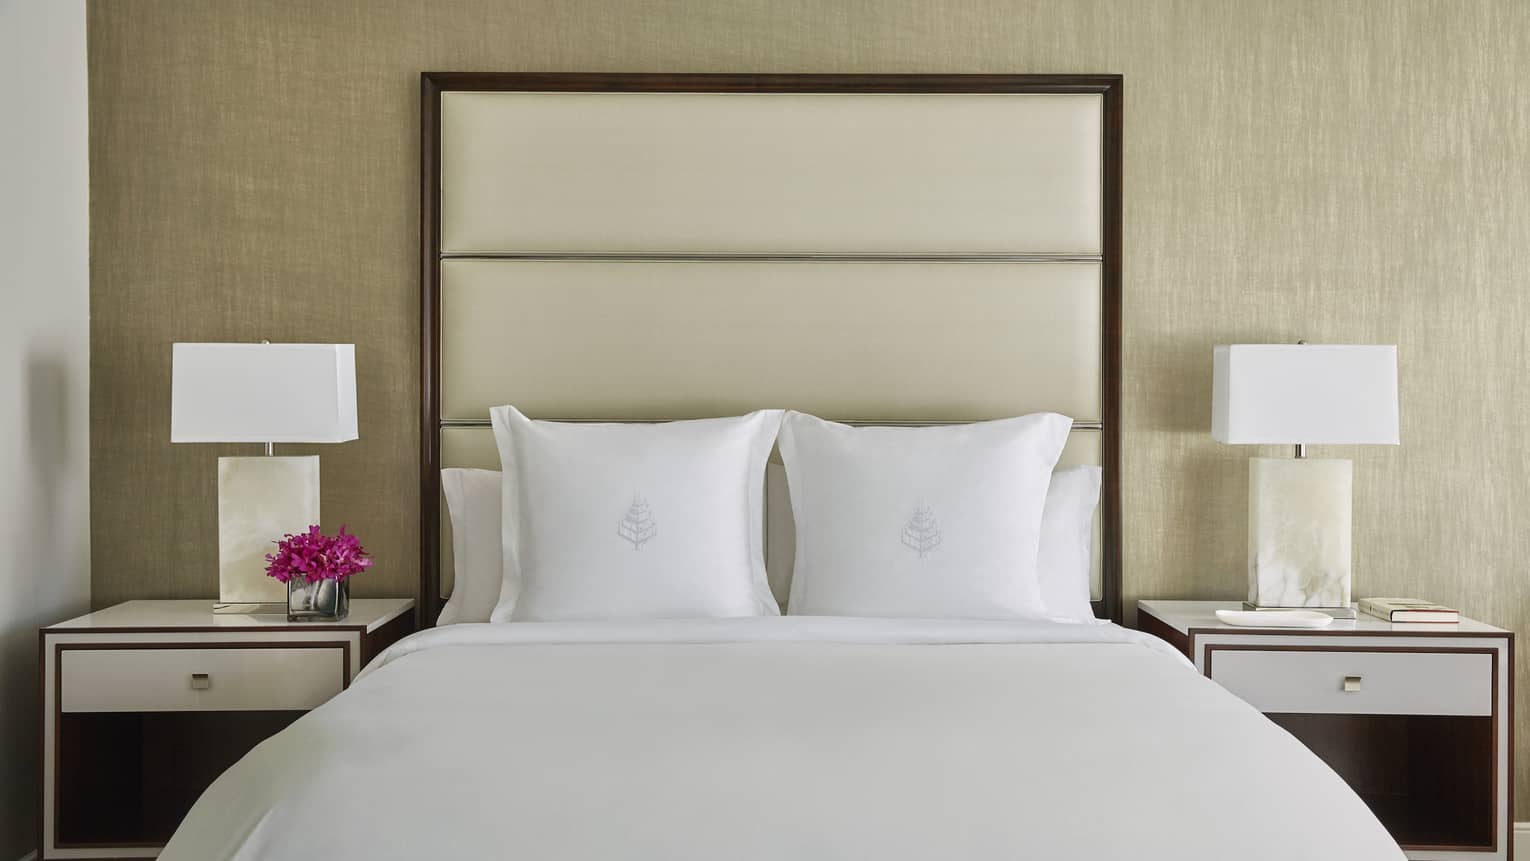 Deluxe Accessible Room head-on view of bed with white linens, tall padded beige headboard, nightstands with lamps